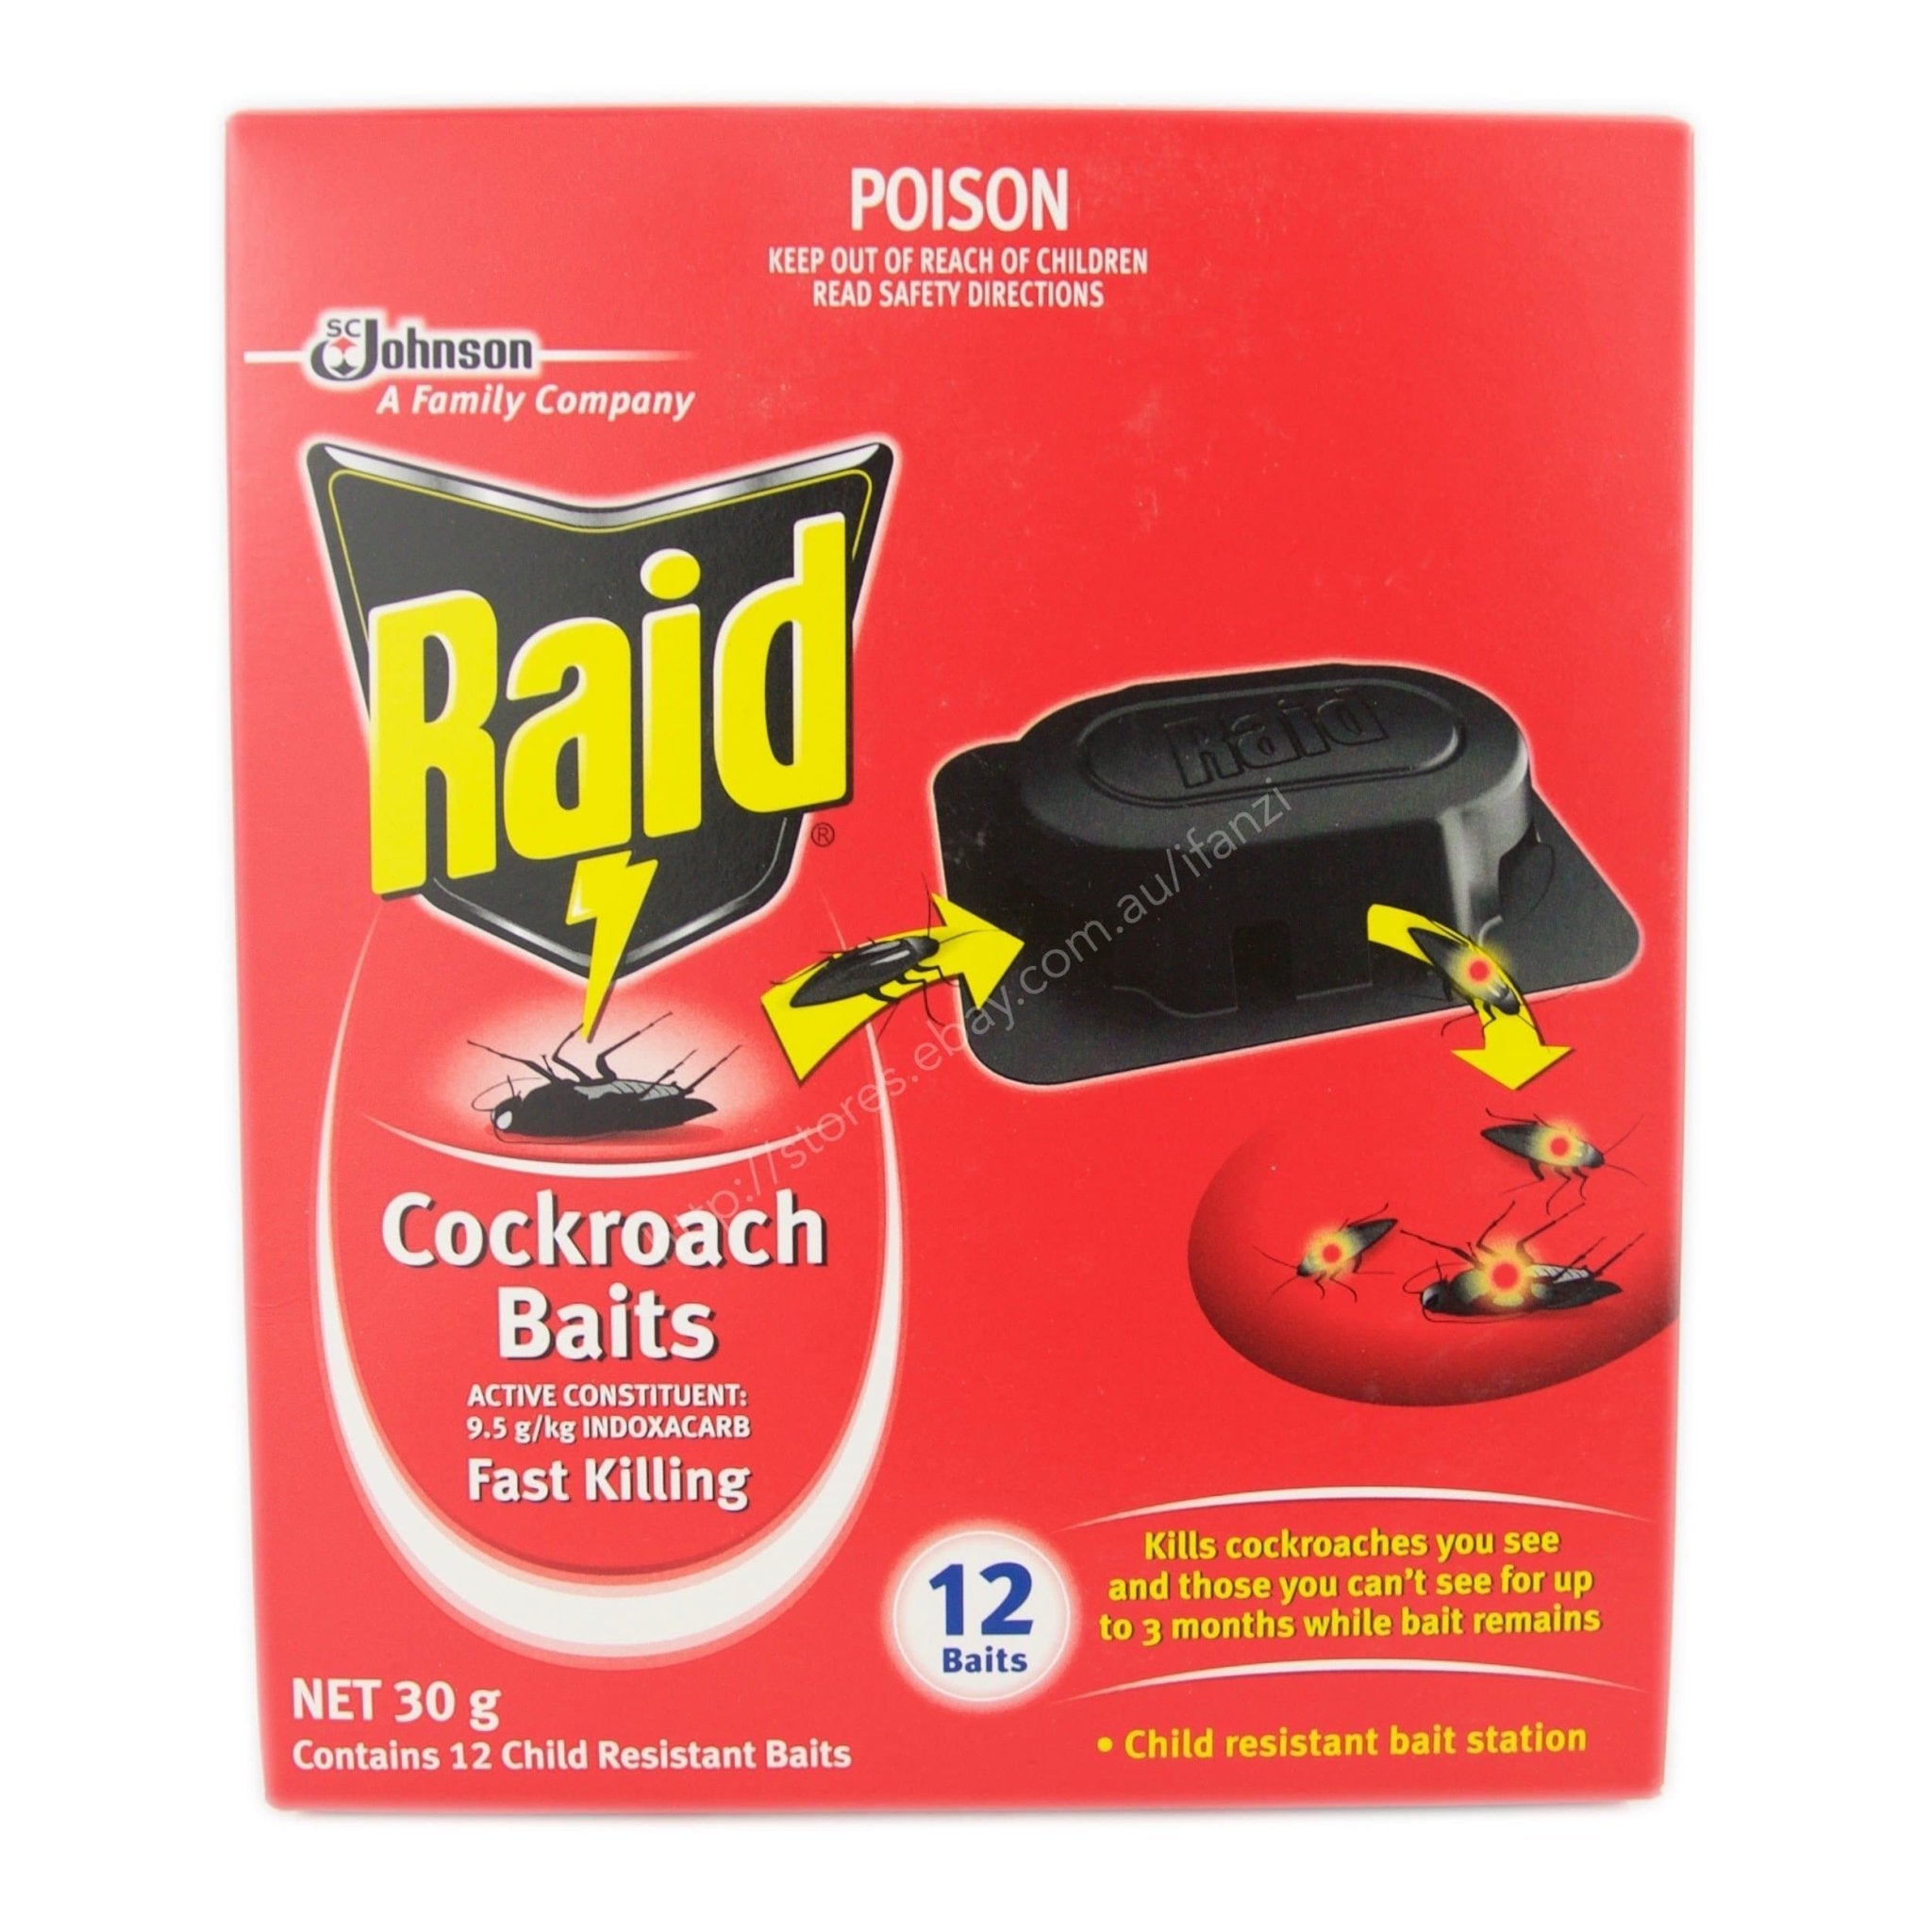 Raid Cockroach Baits 12Pieces included 788054 - Double Bay Hardware